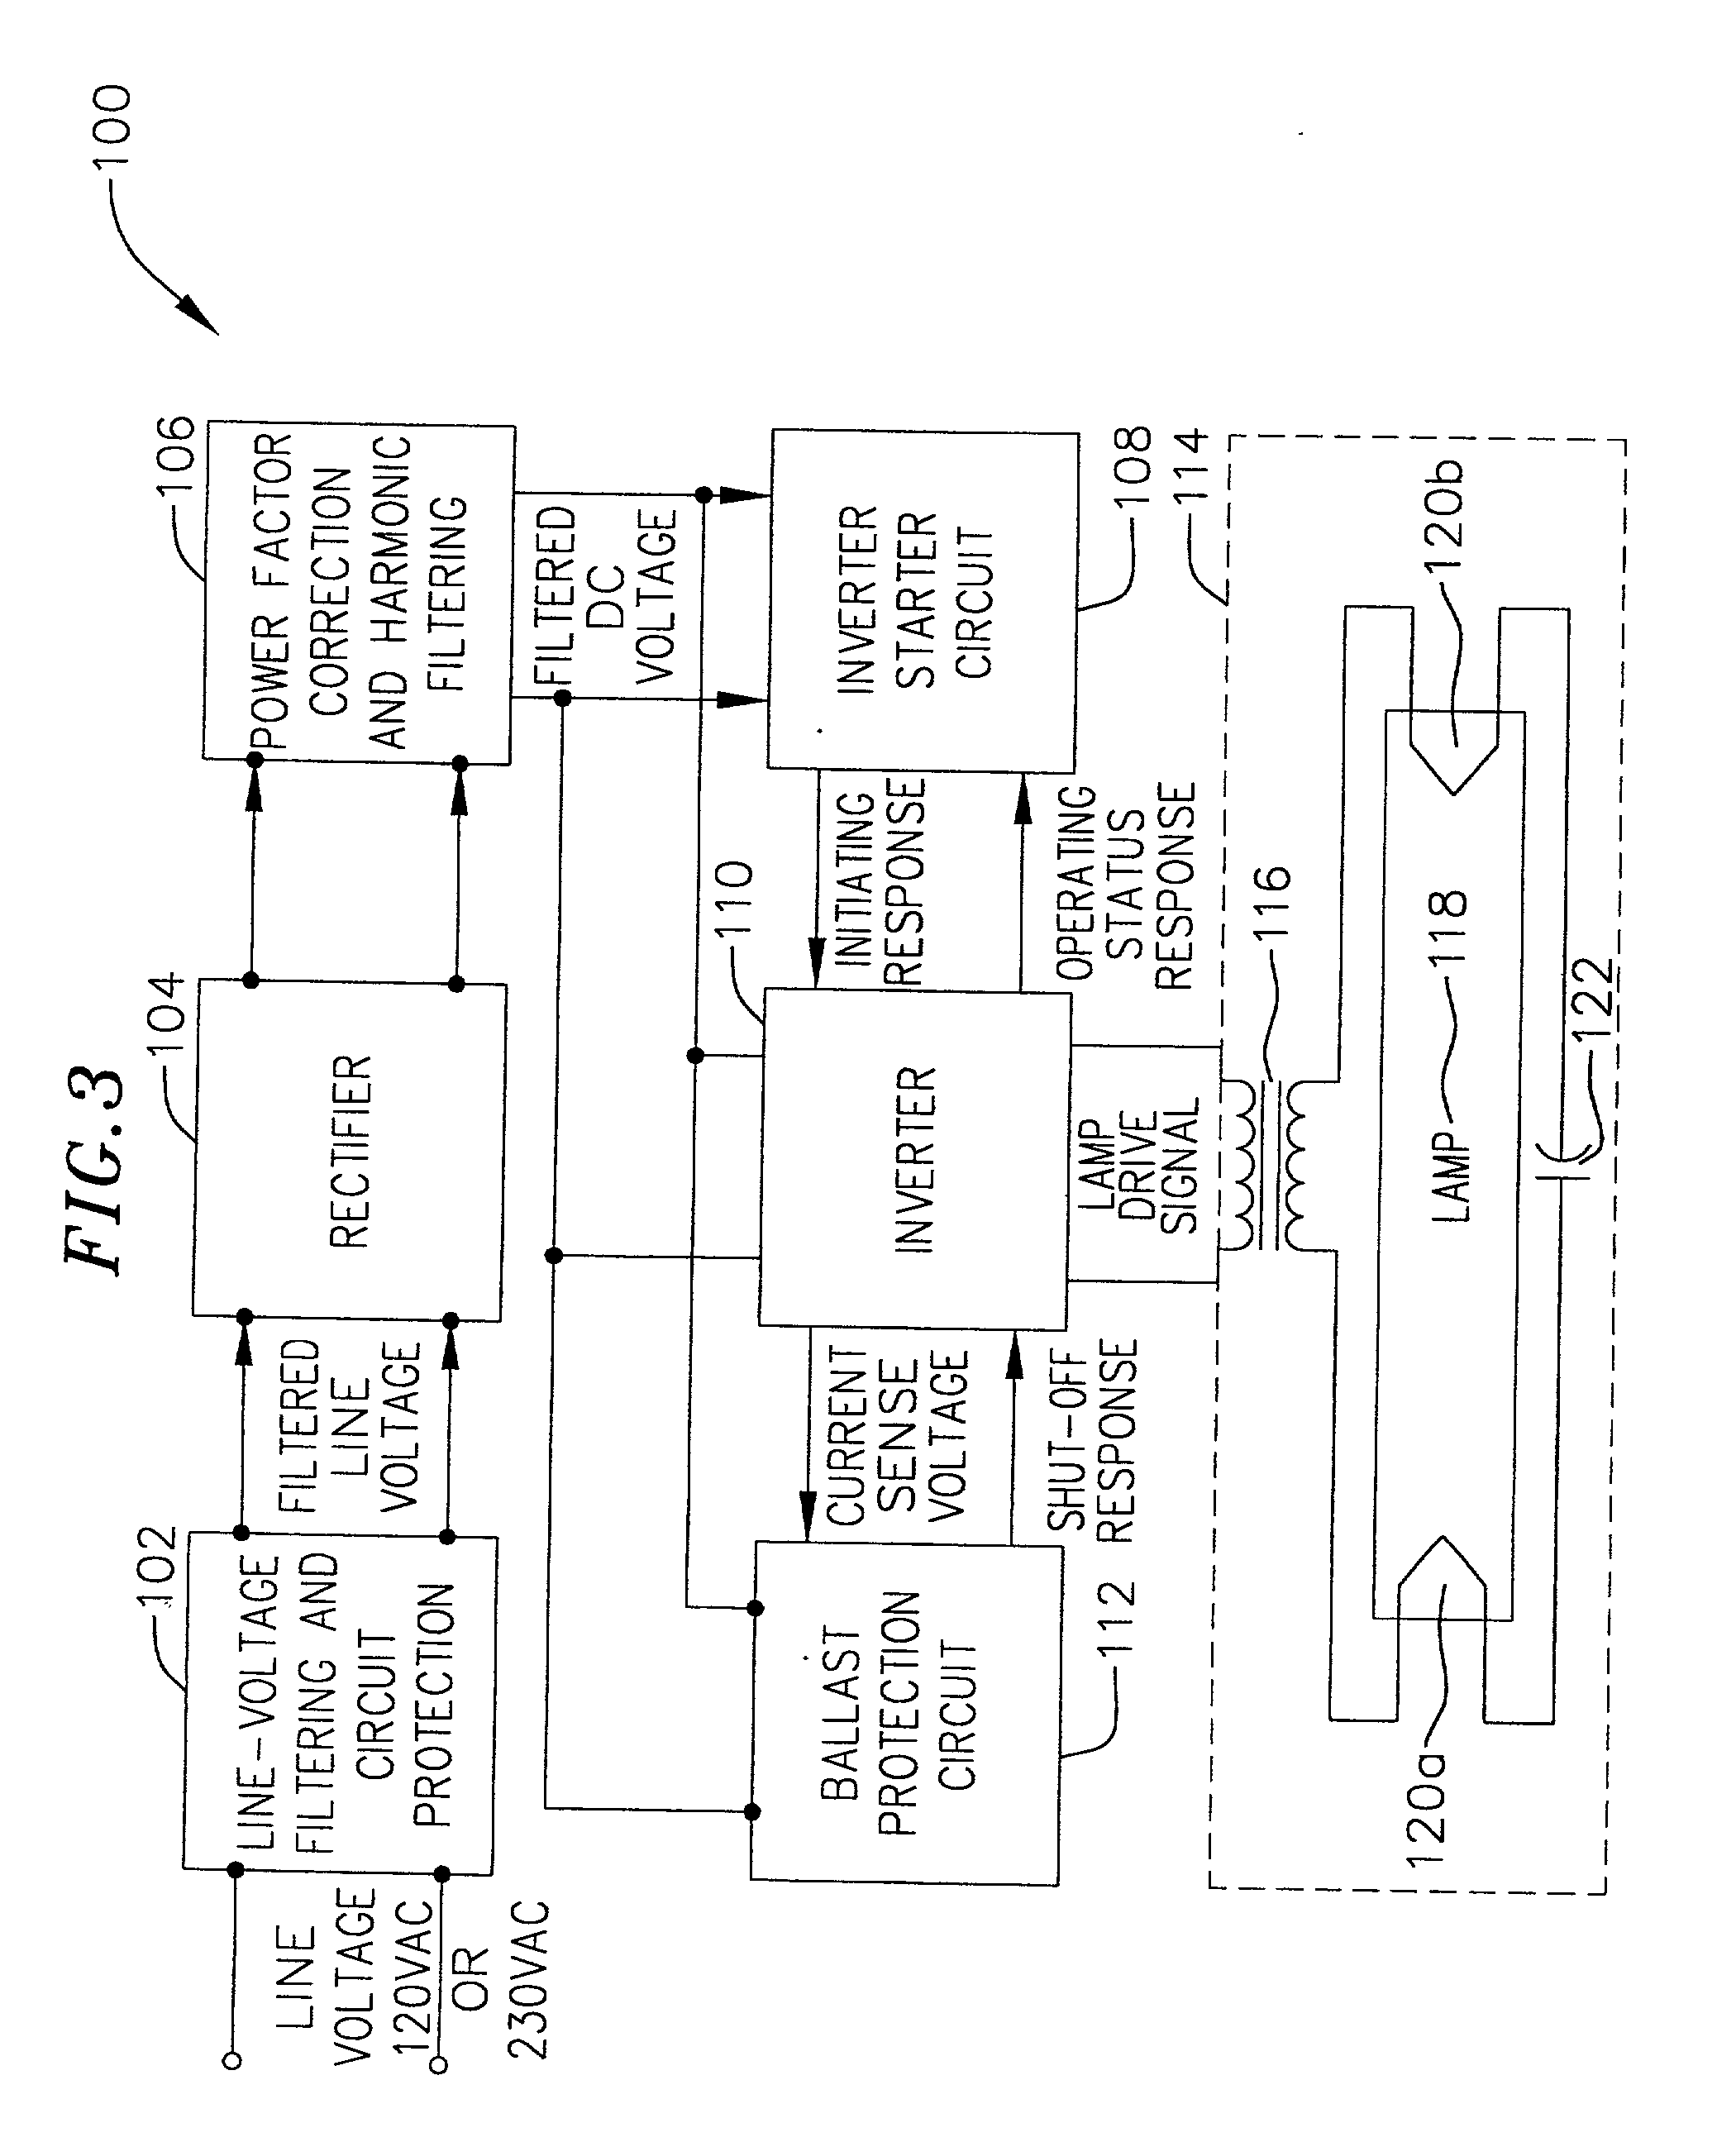 Ballast with lamp sensor and method therefor